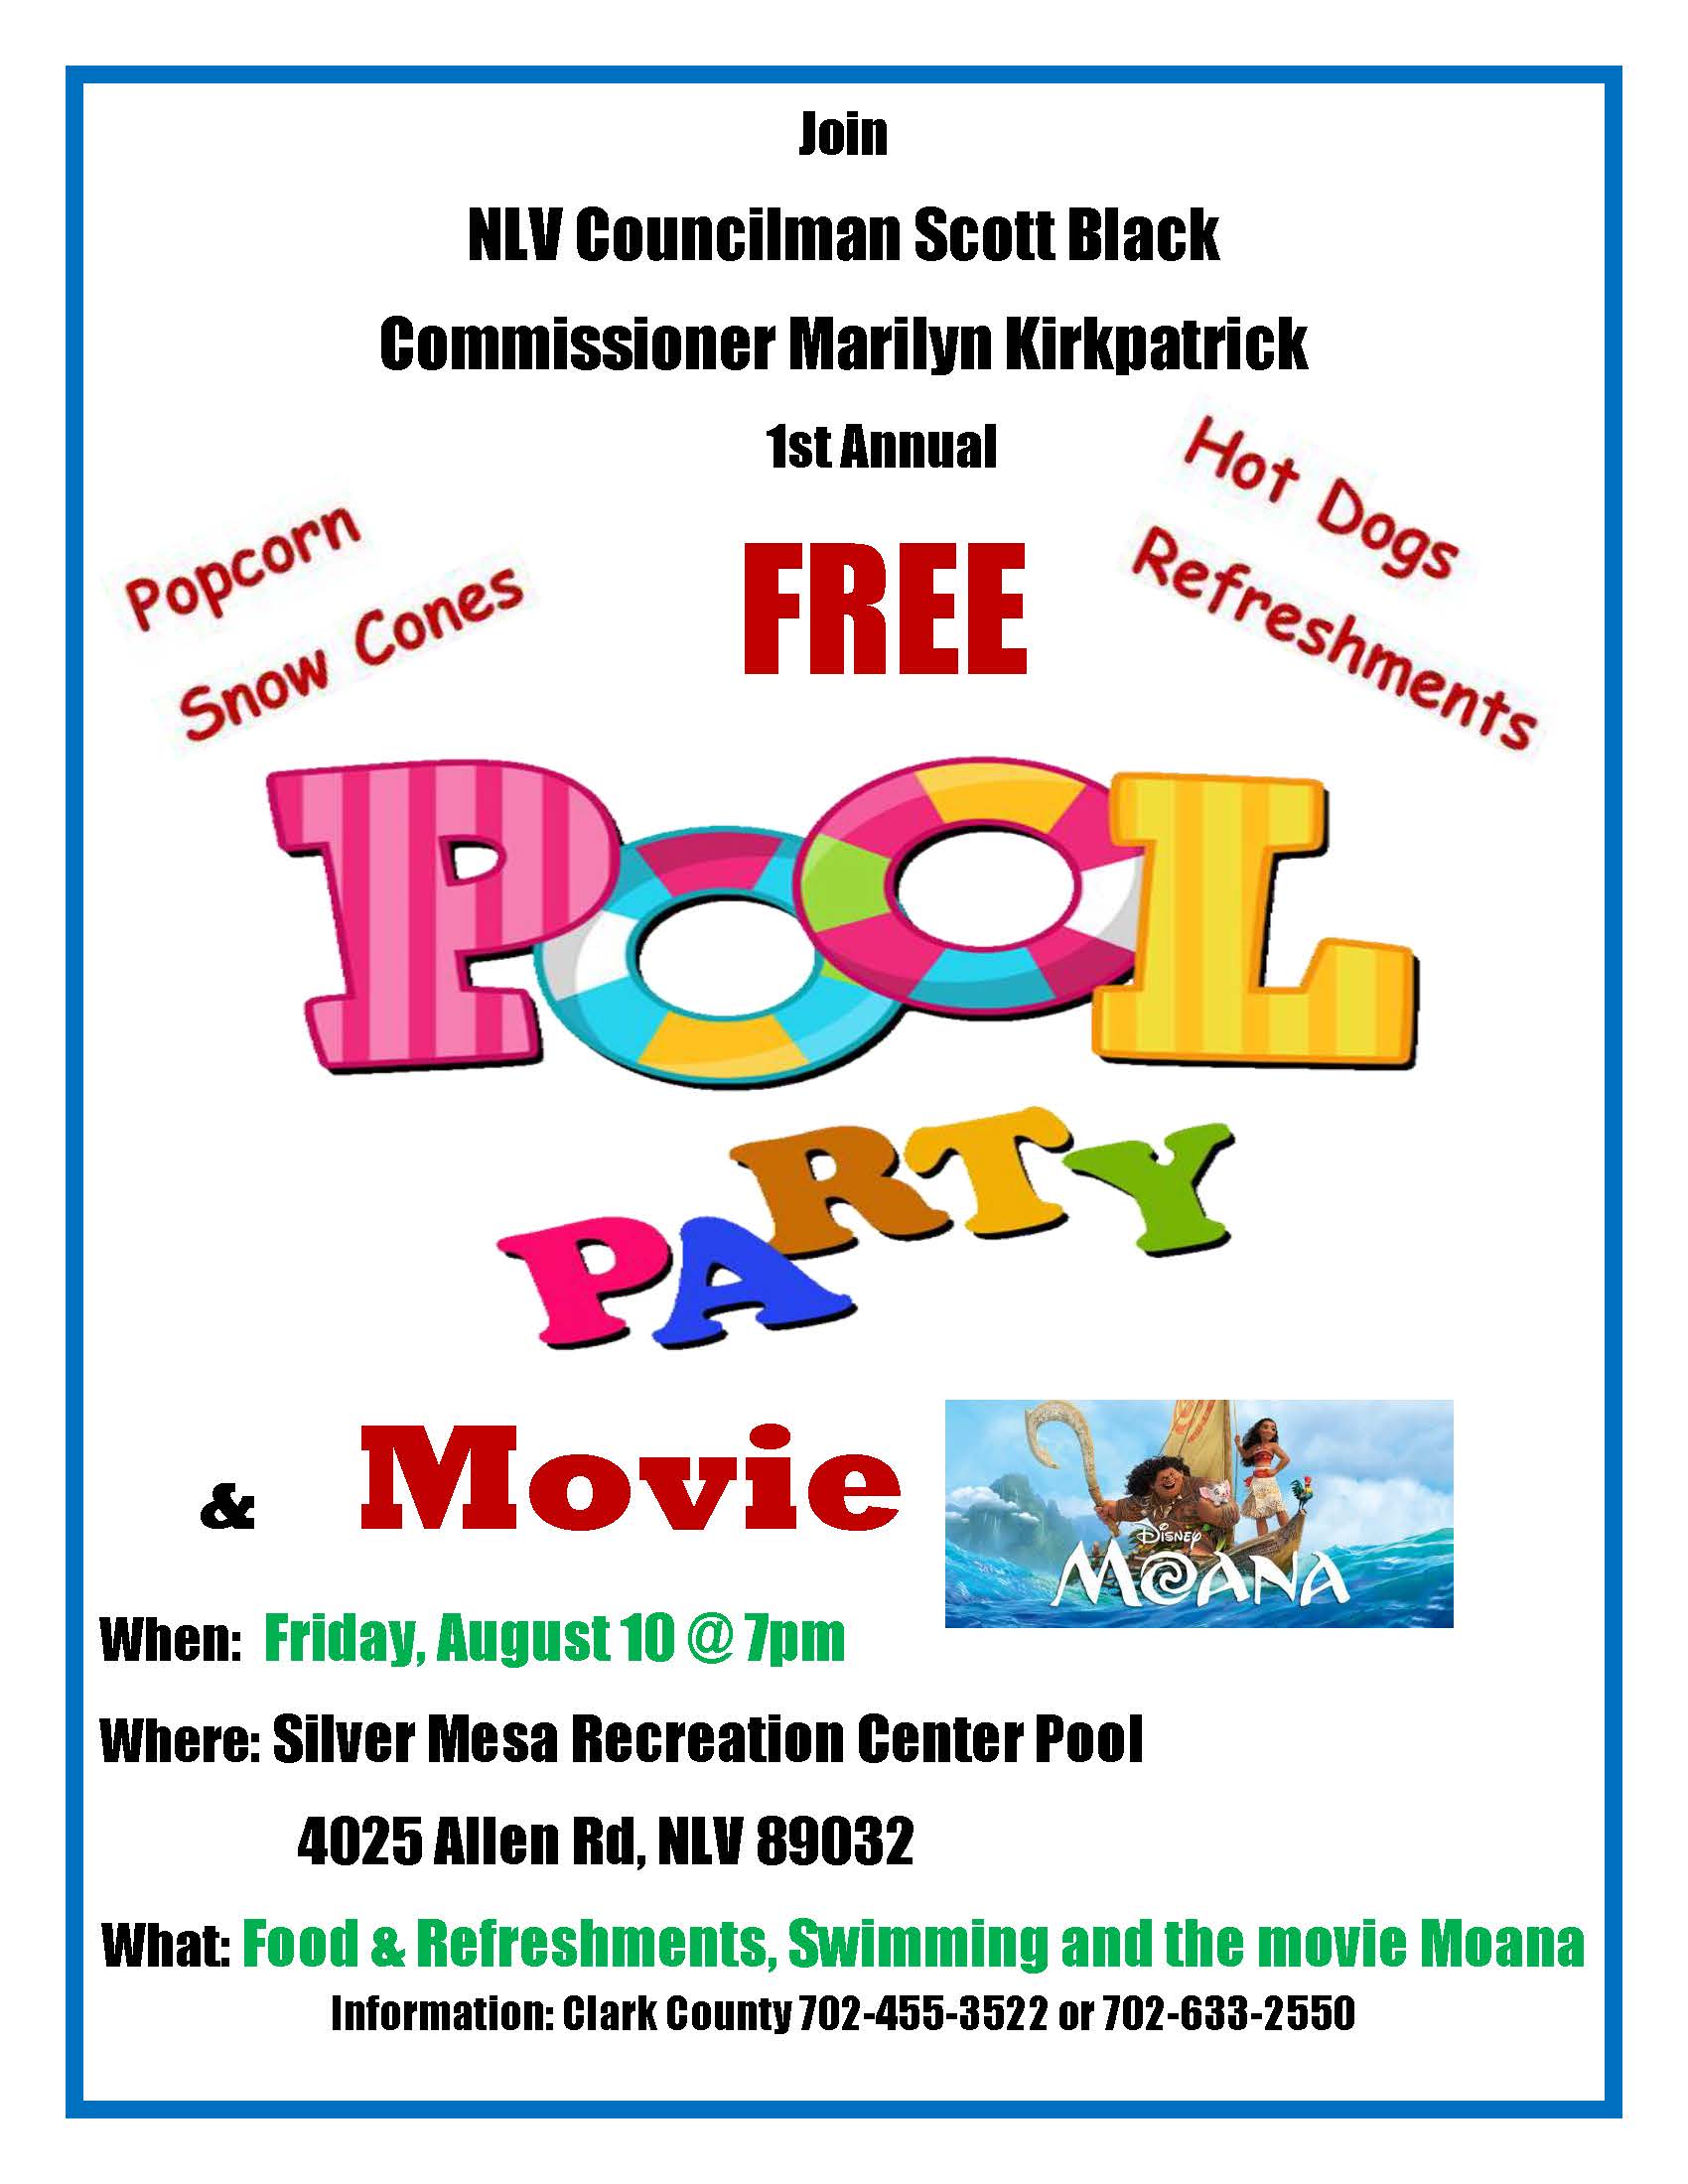 Plantación tuberculosis Proceso City of North Las Vegas on Twitter: "Looking to cool off? Join North Las  Vegas Councilman Scott Black and Clark County Commissioner Marilyn  Kirkpatrick at Silver Mesa Recreation Center TODAY for a